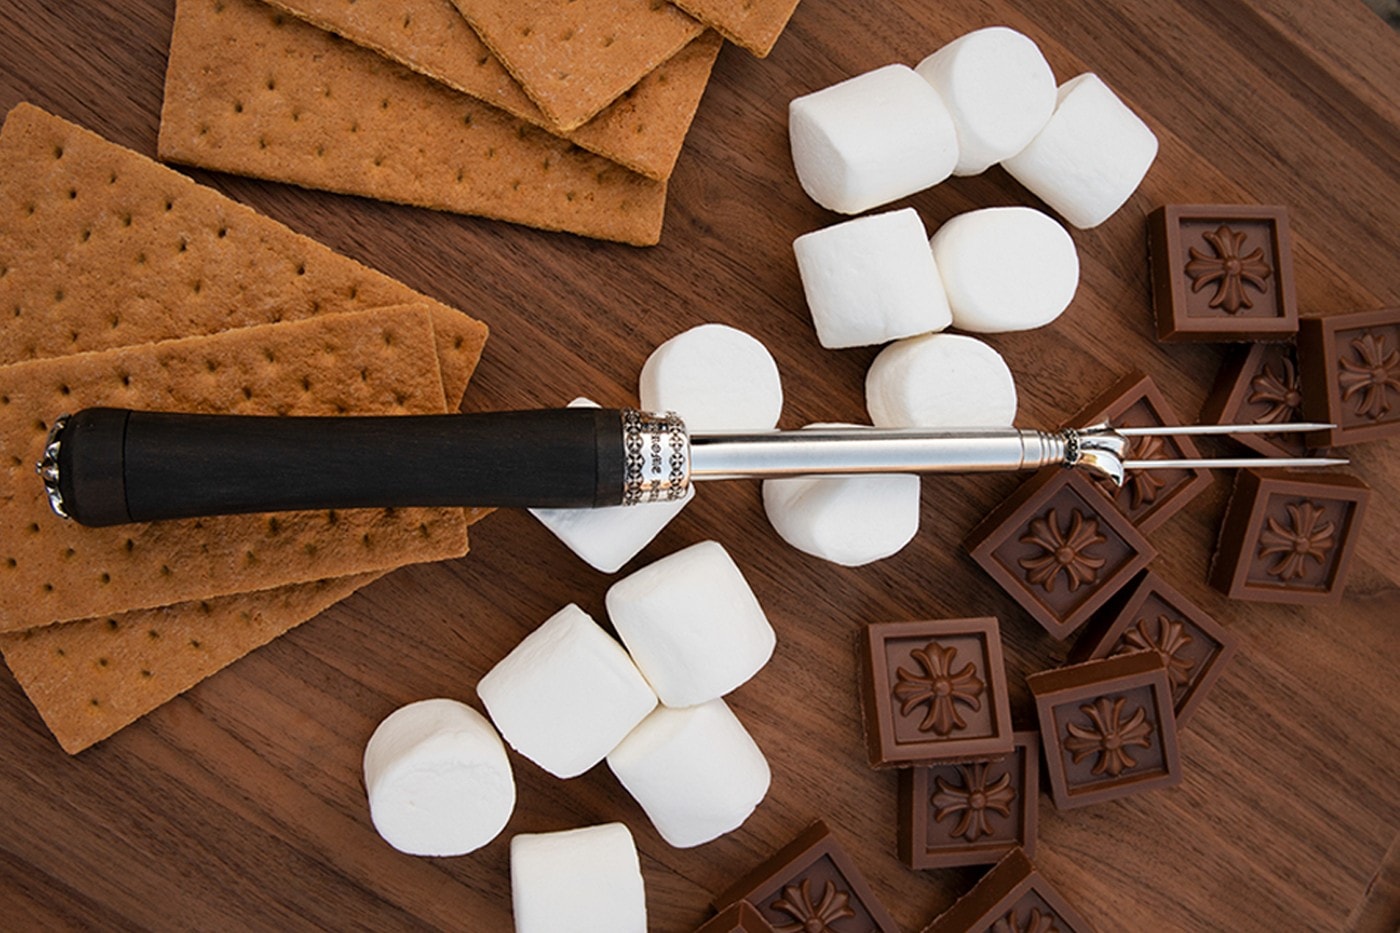 Chrome Hearts Marshmallow Skewer BBQ Stick Release S'Mores Silver Luxury Design